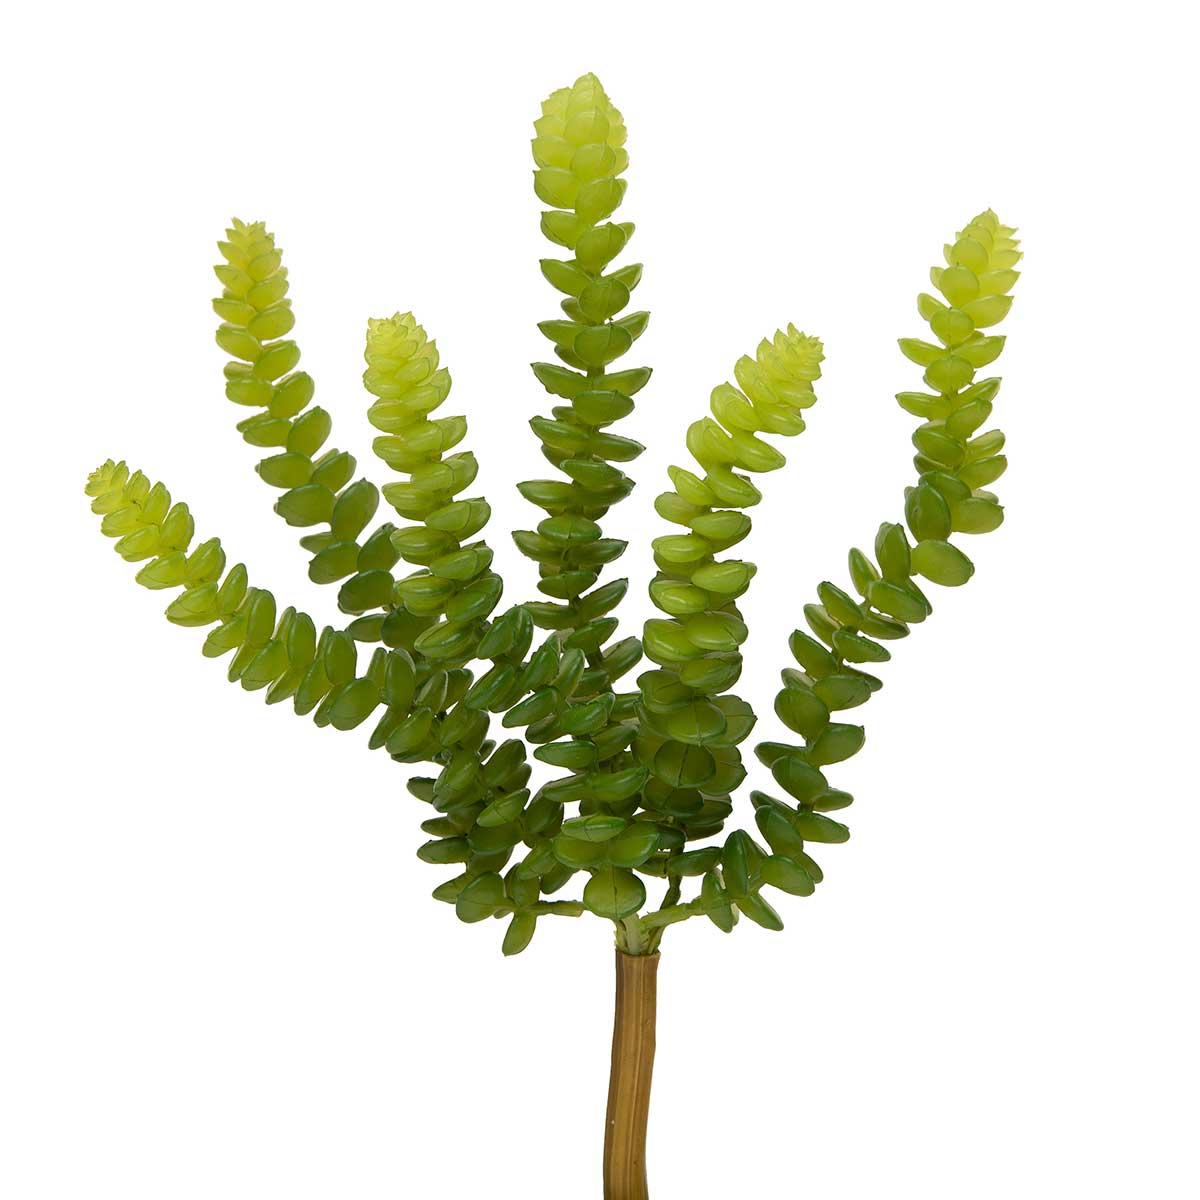 SUCCULENT ASTROLOBA GREEN 6IN X 9.5IN - Click Image to Close